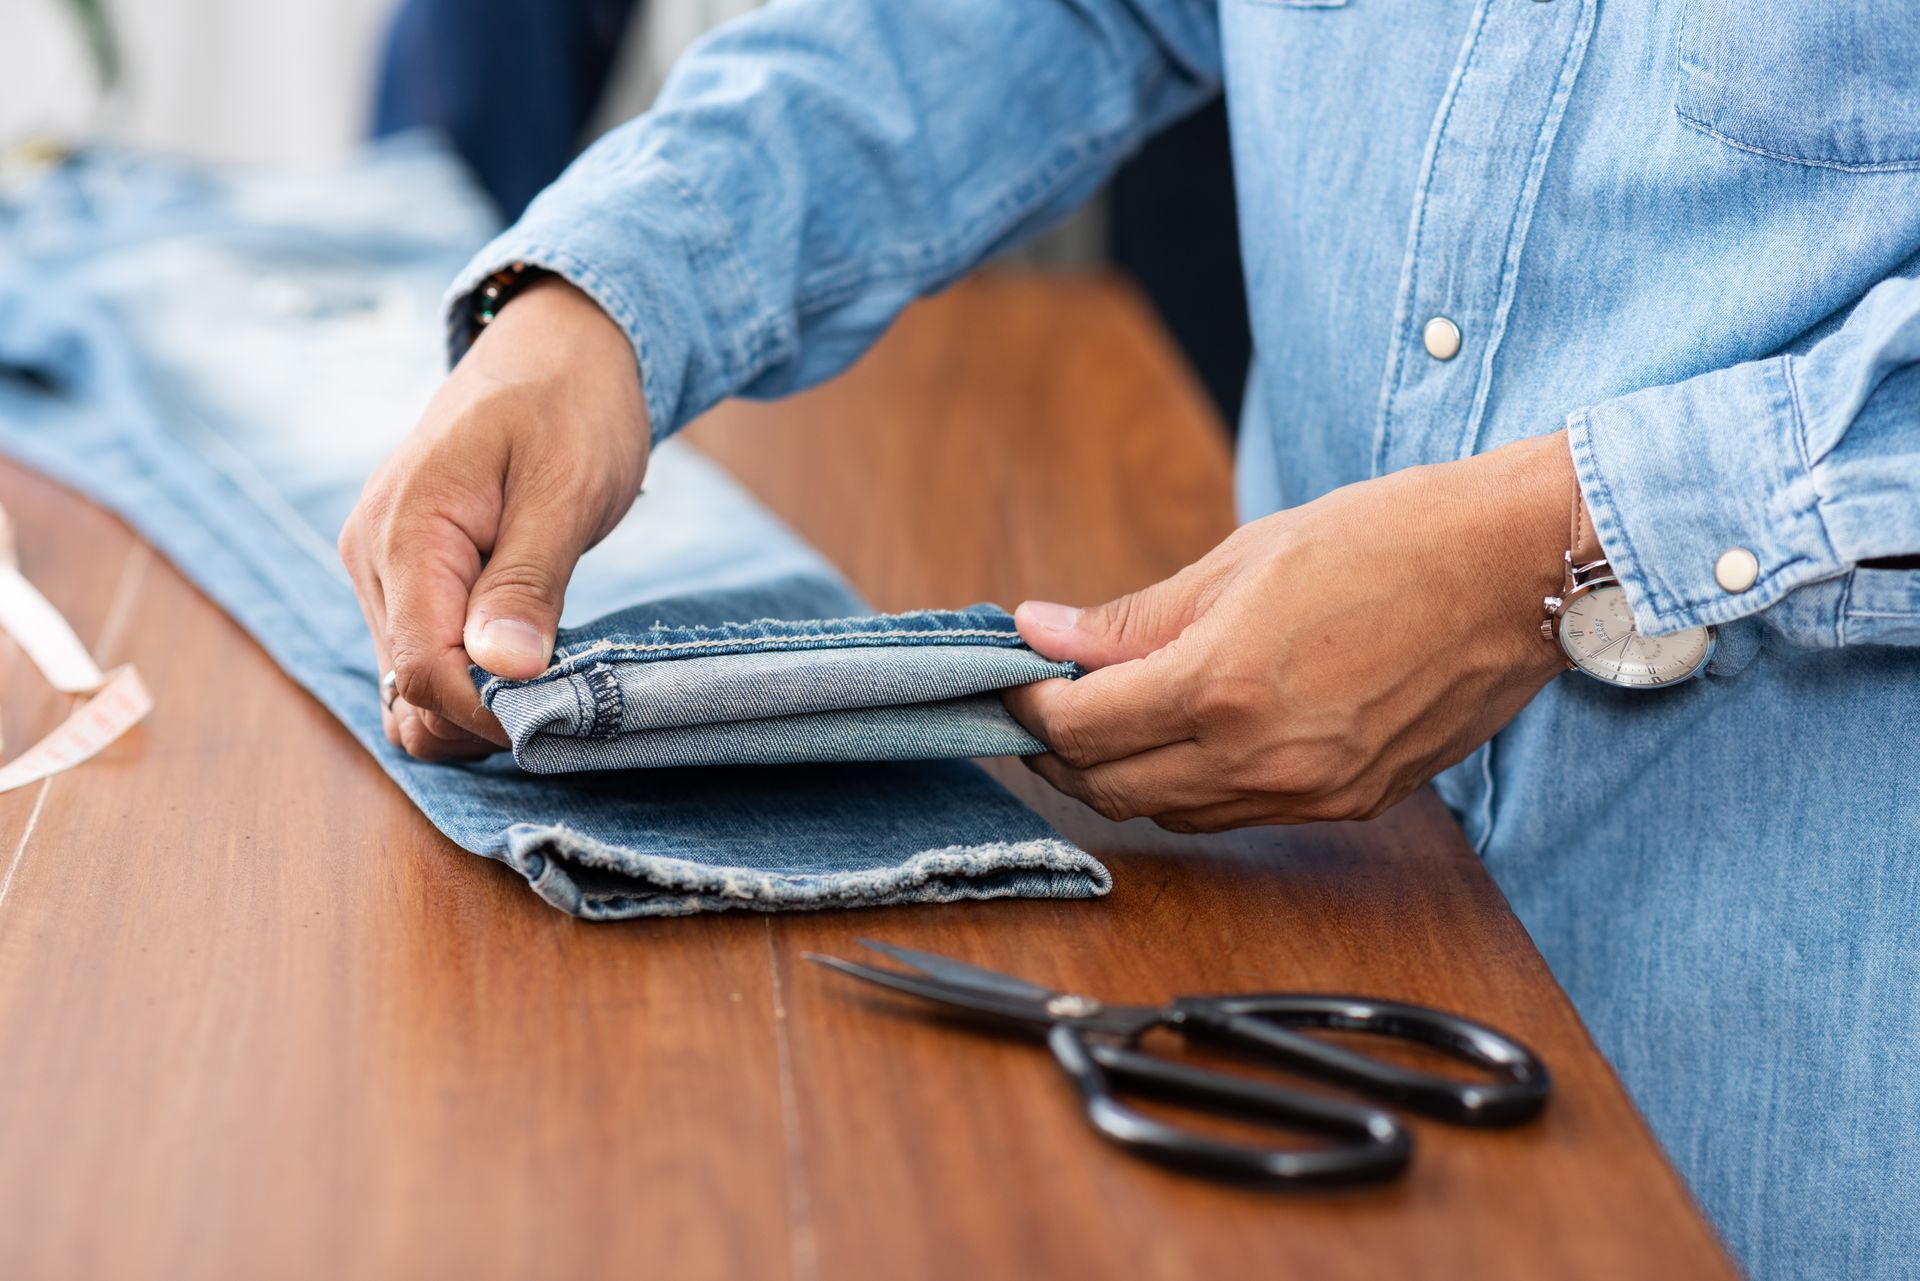 Tailor working with blue denim jeans